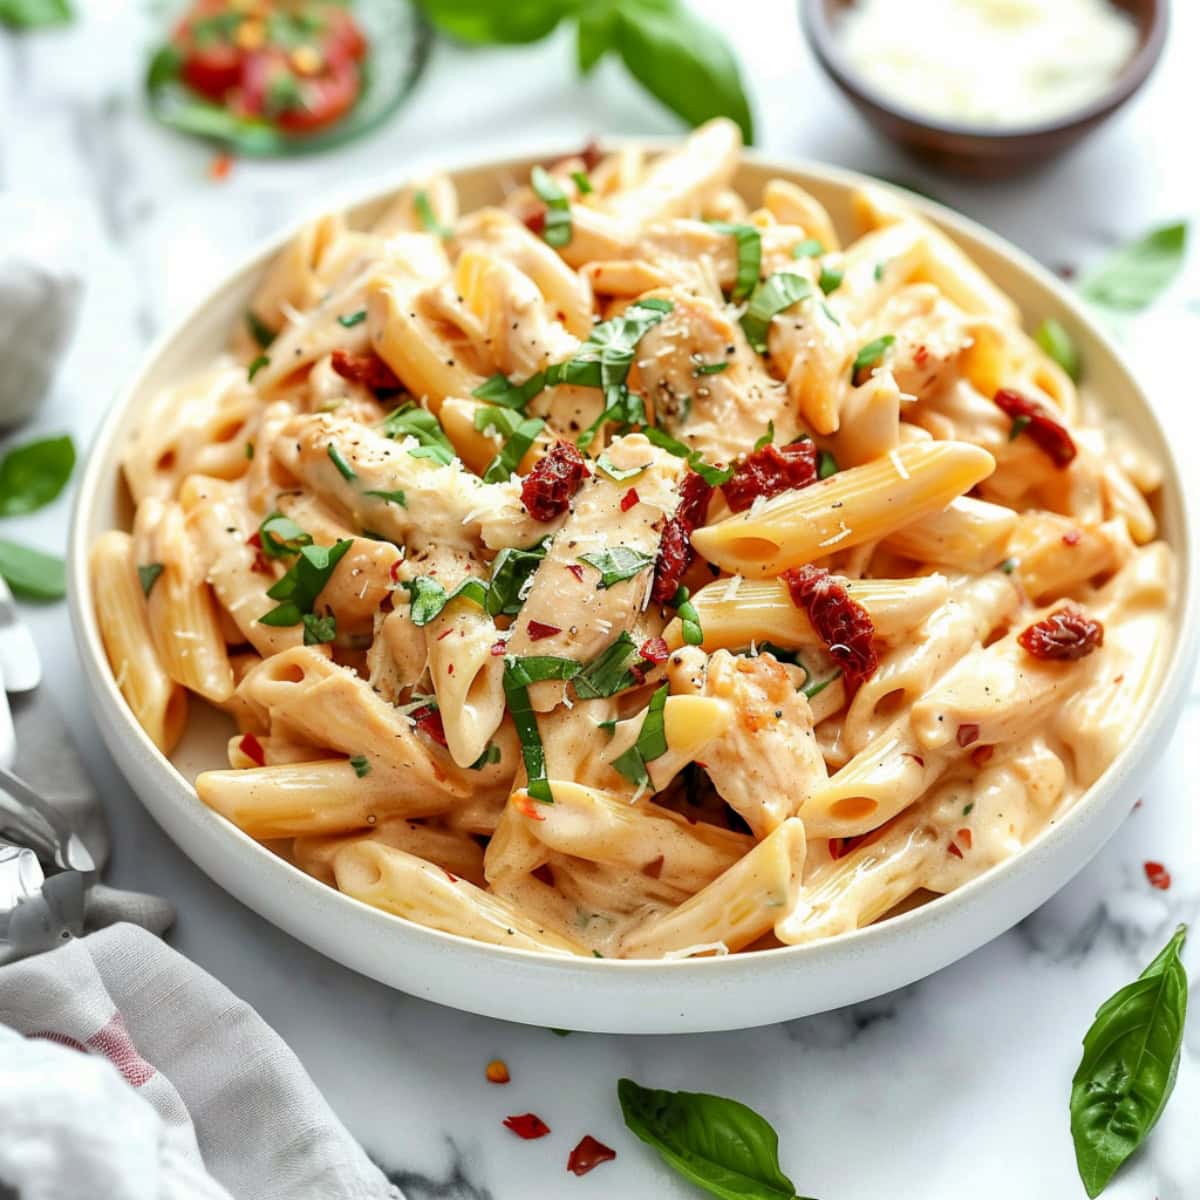 Close-up view of a plate of sun-dried tomato chicken pasta.